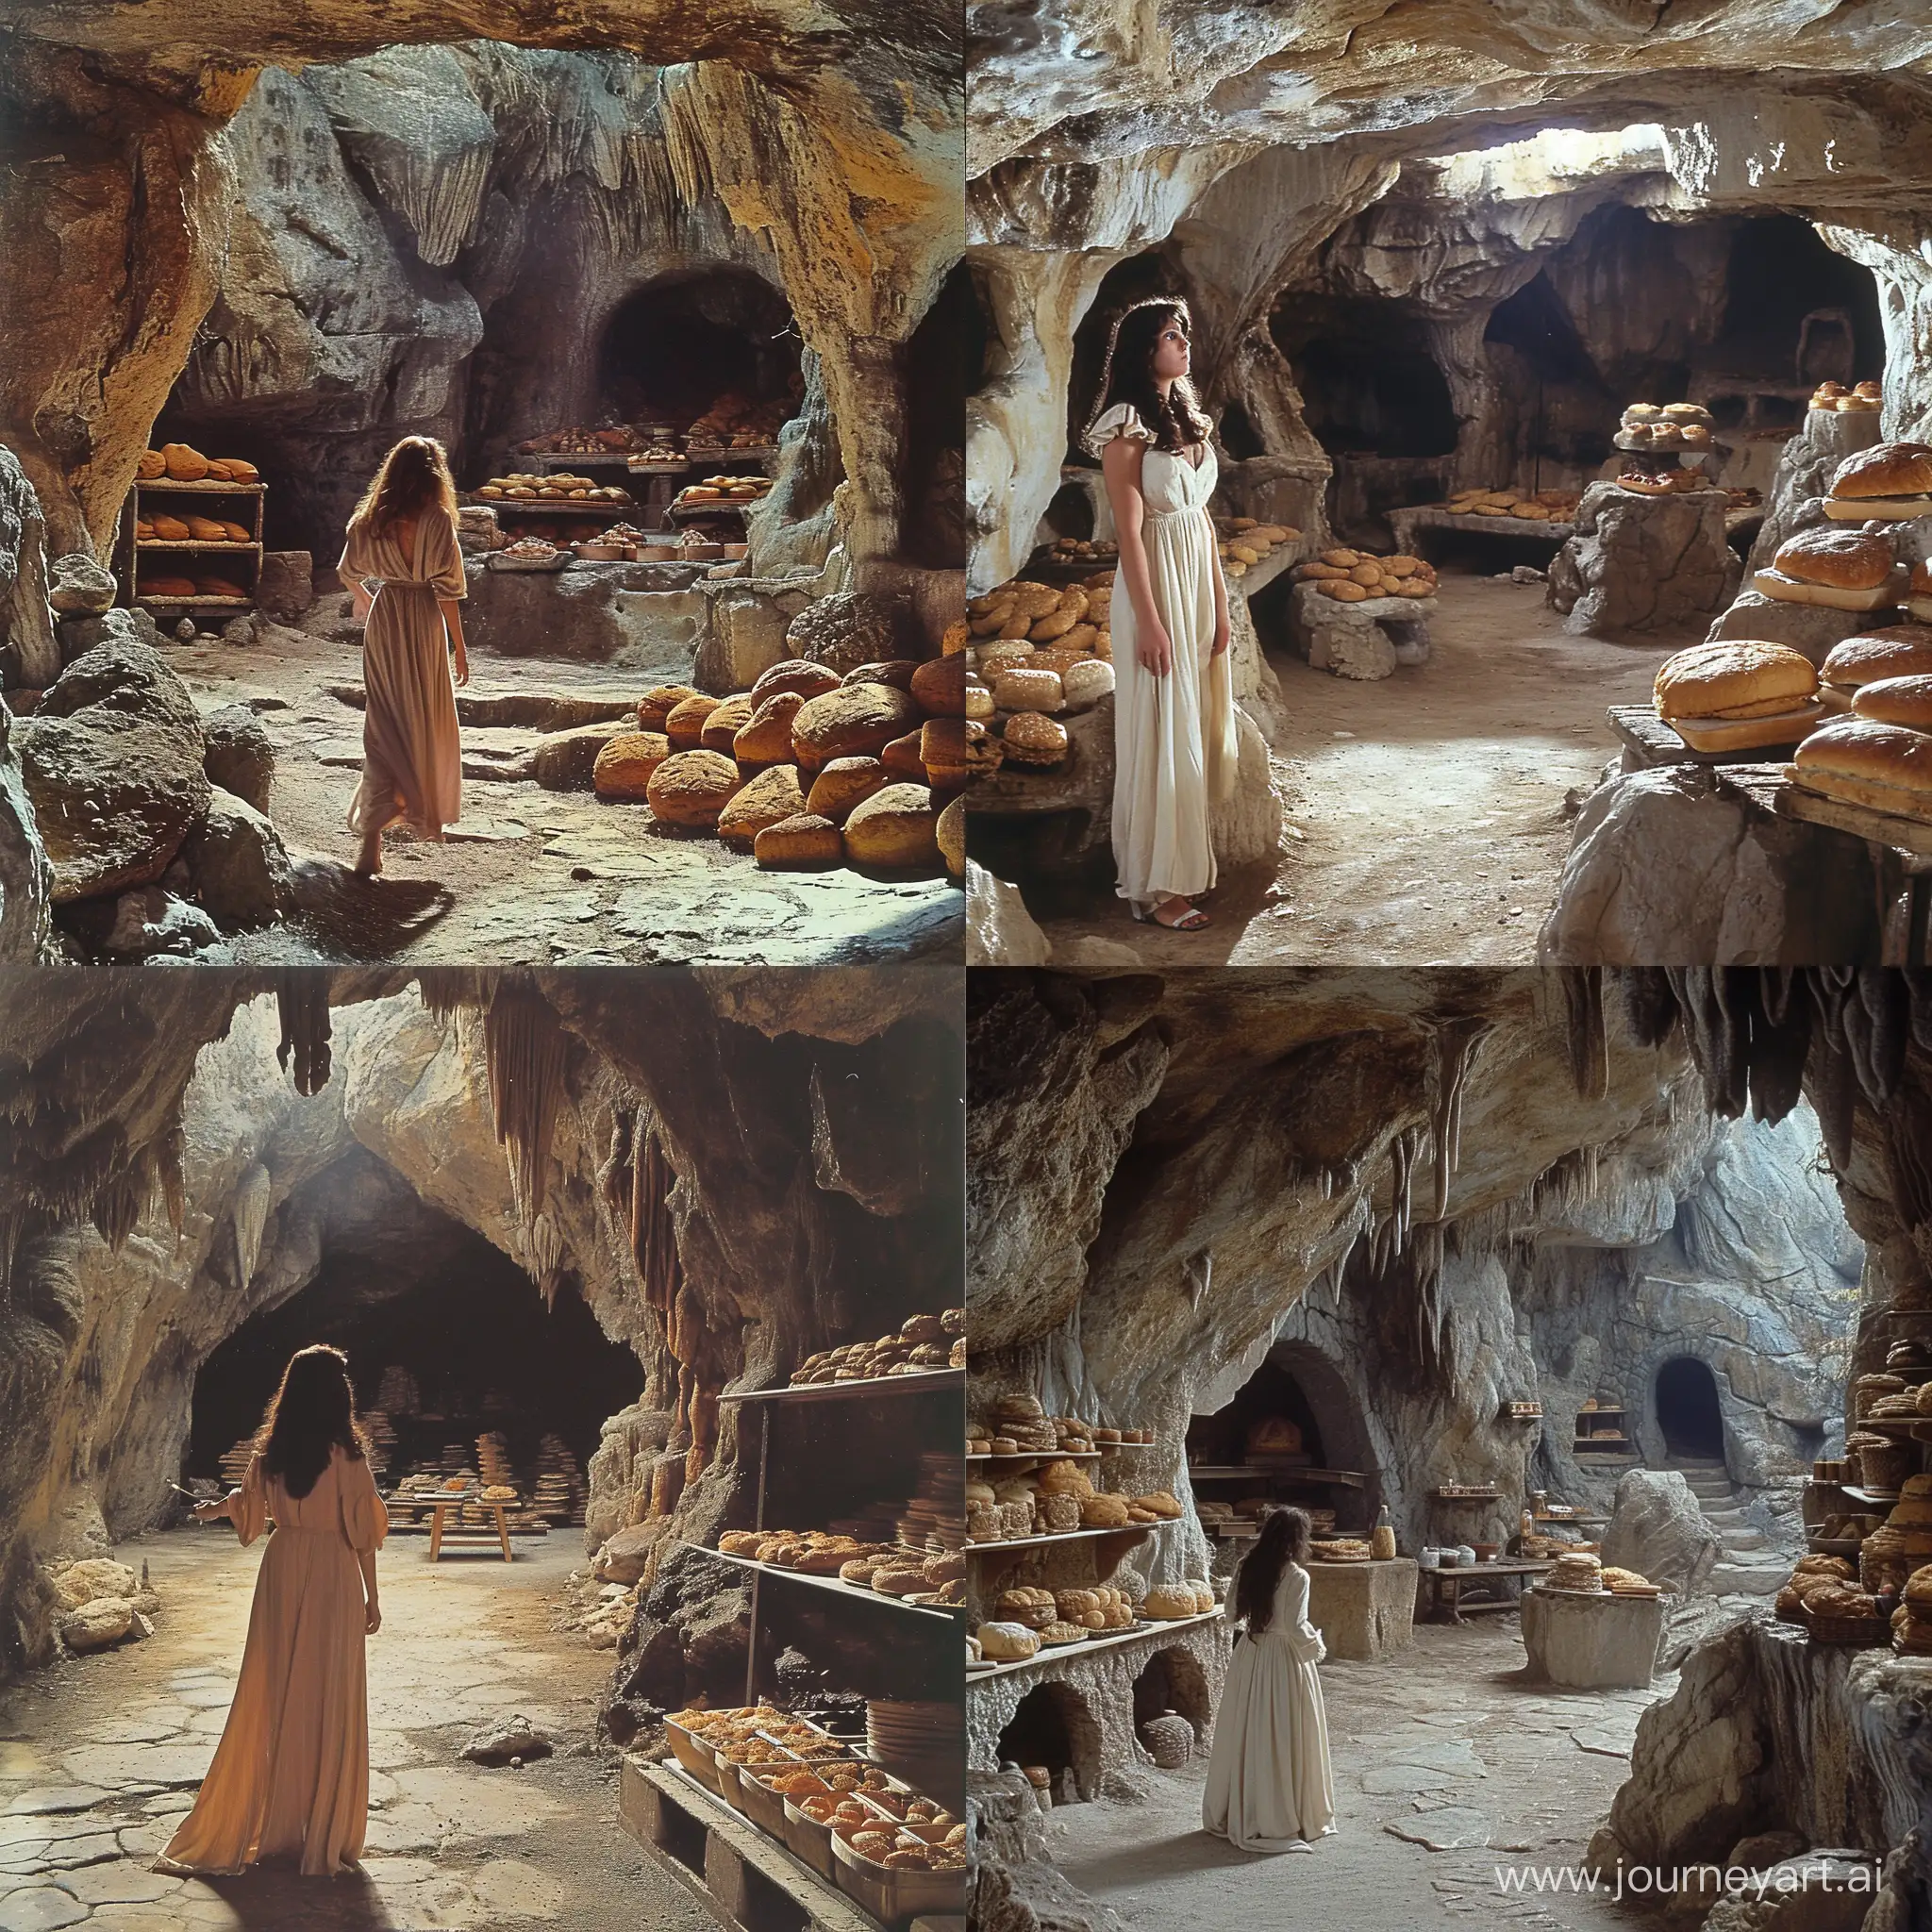 dvd screenengrabs arx fatalis bakery with woman in rocky cave 1980 style --v 6 --ar 1:1 --no 96015